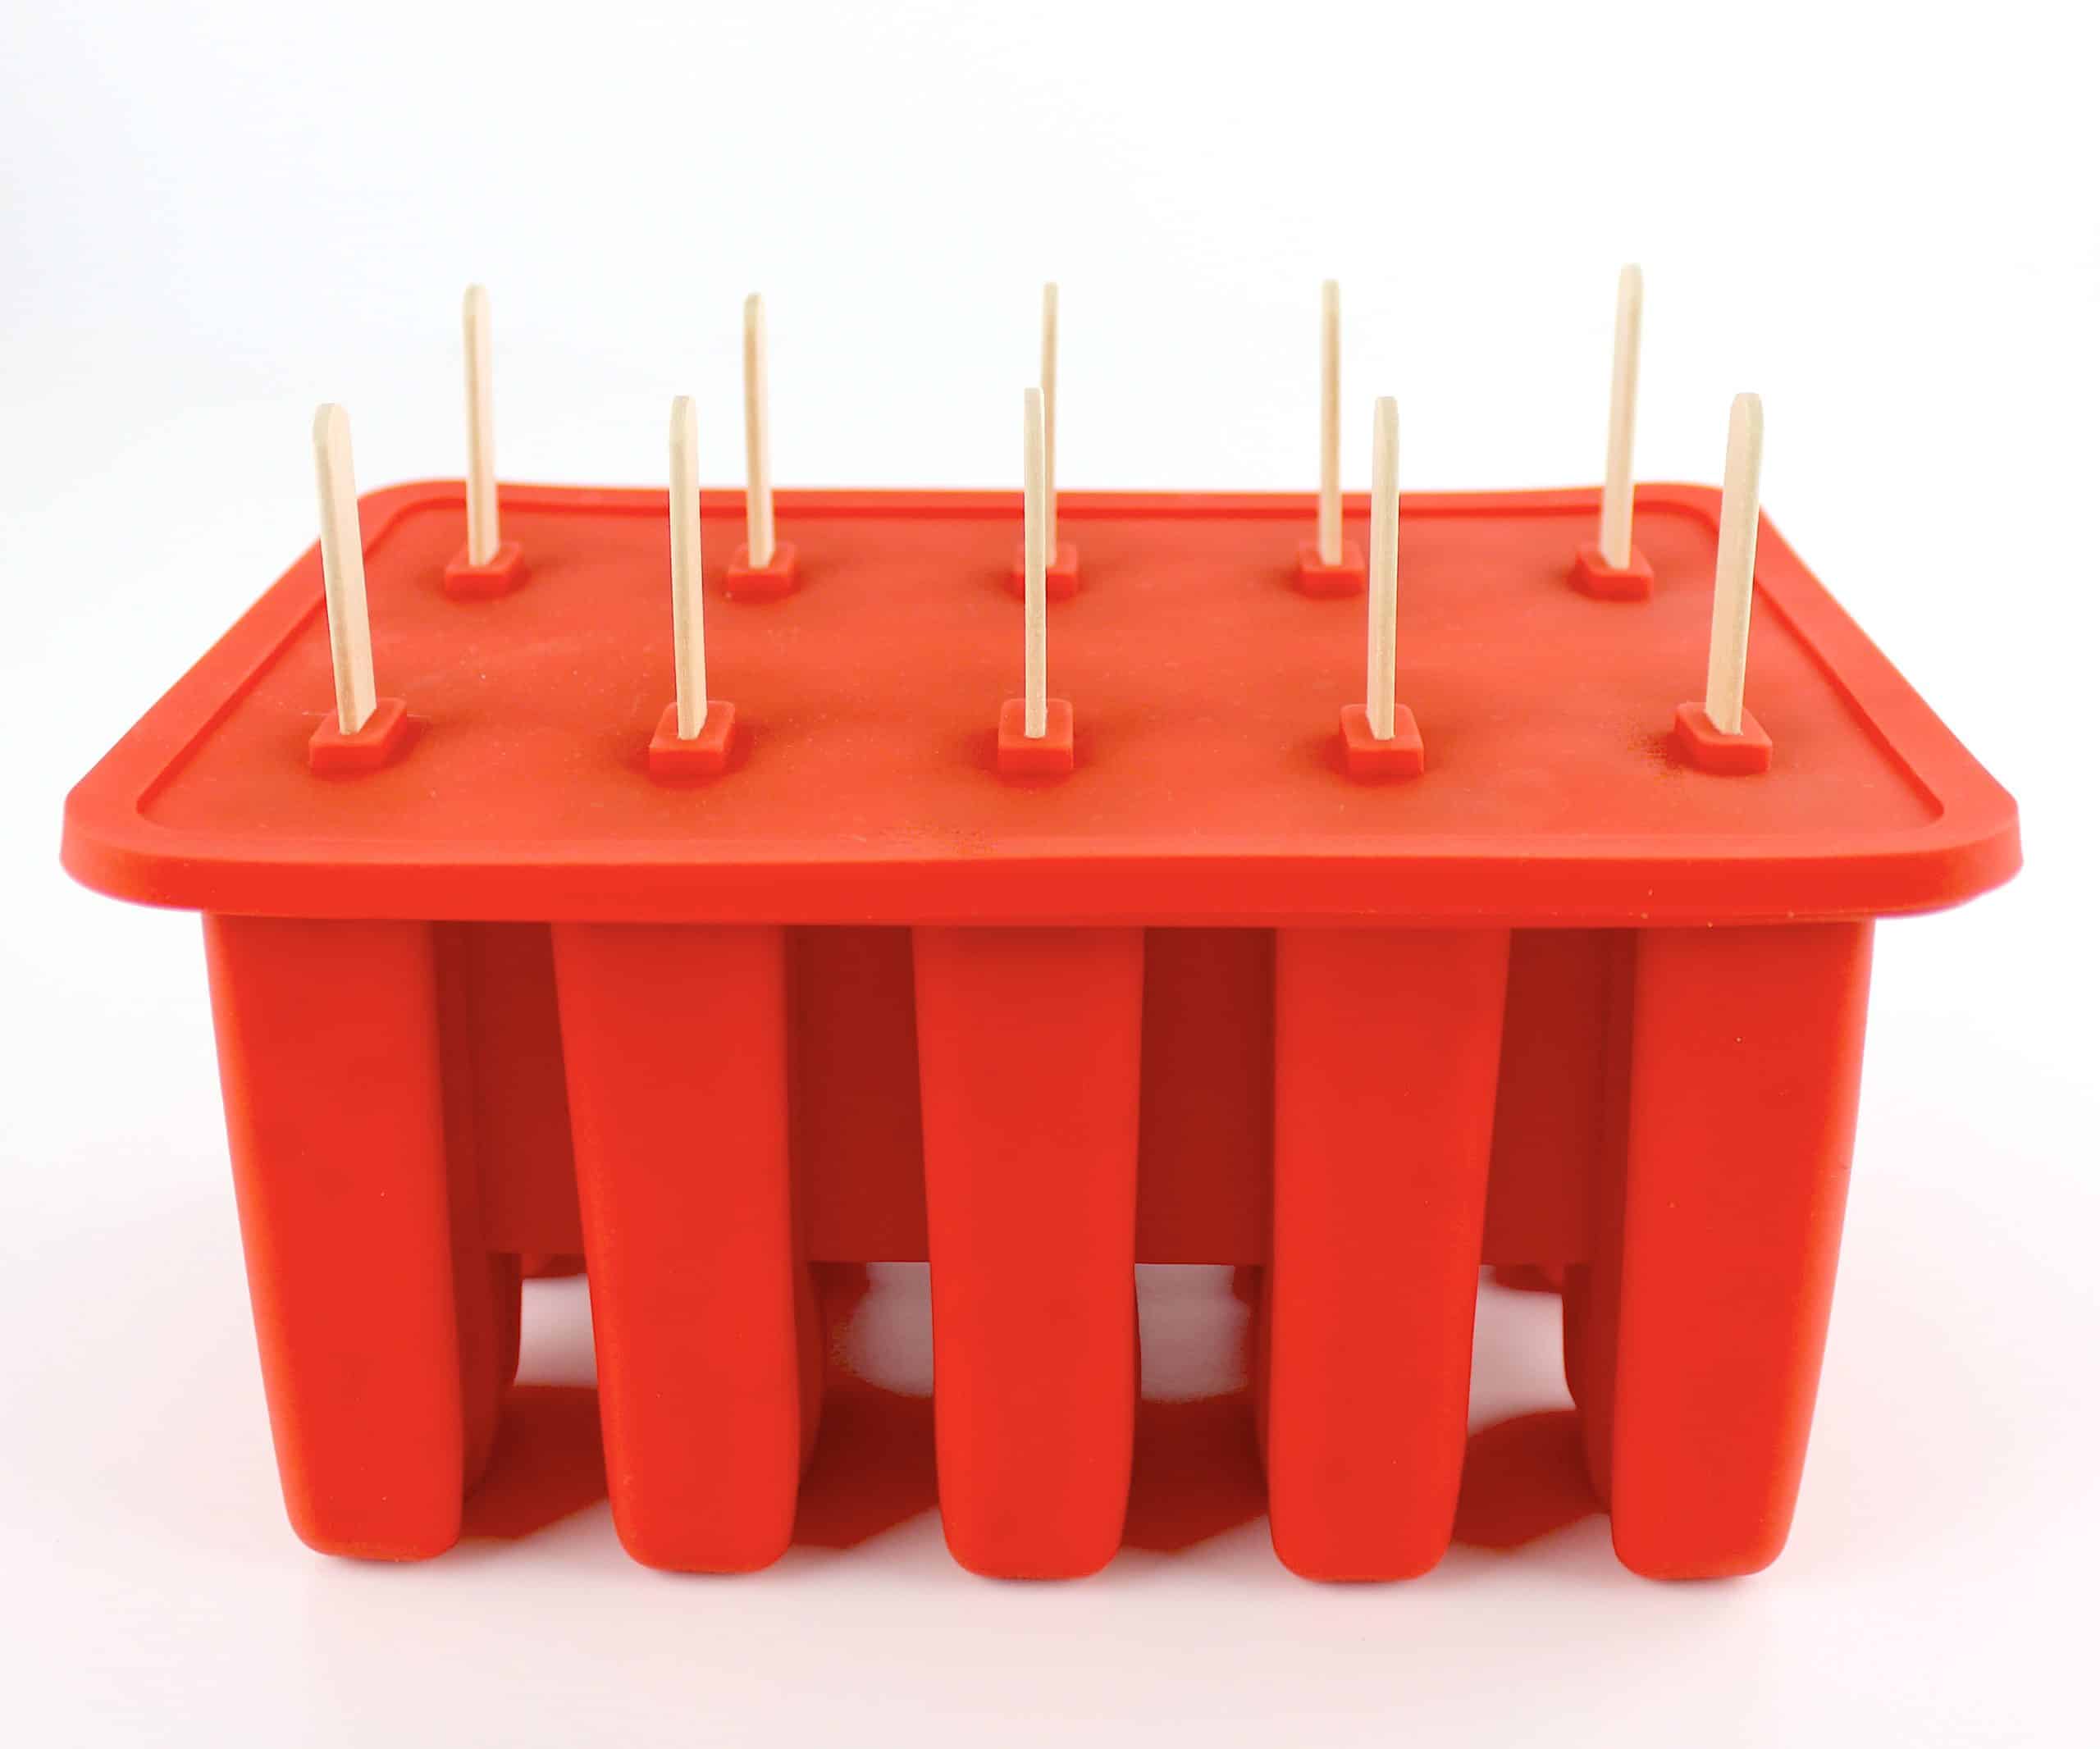 red silicone popsicle mold with cover and popsicle sticks